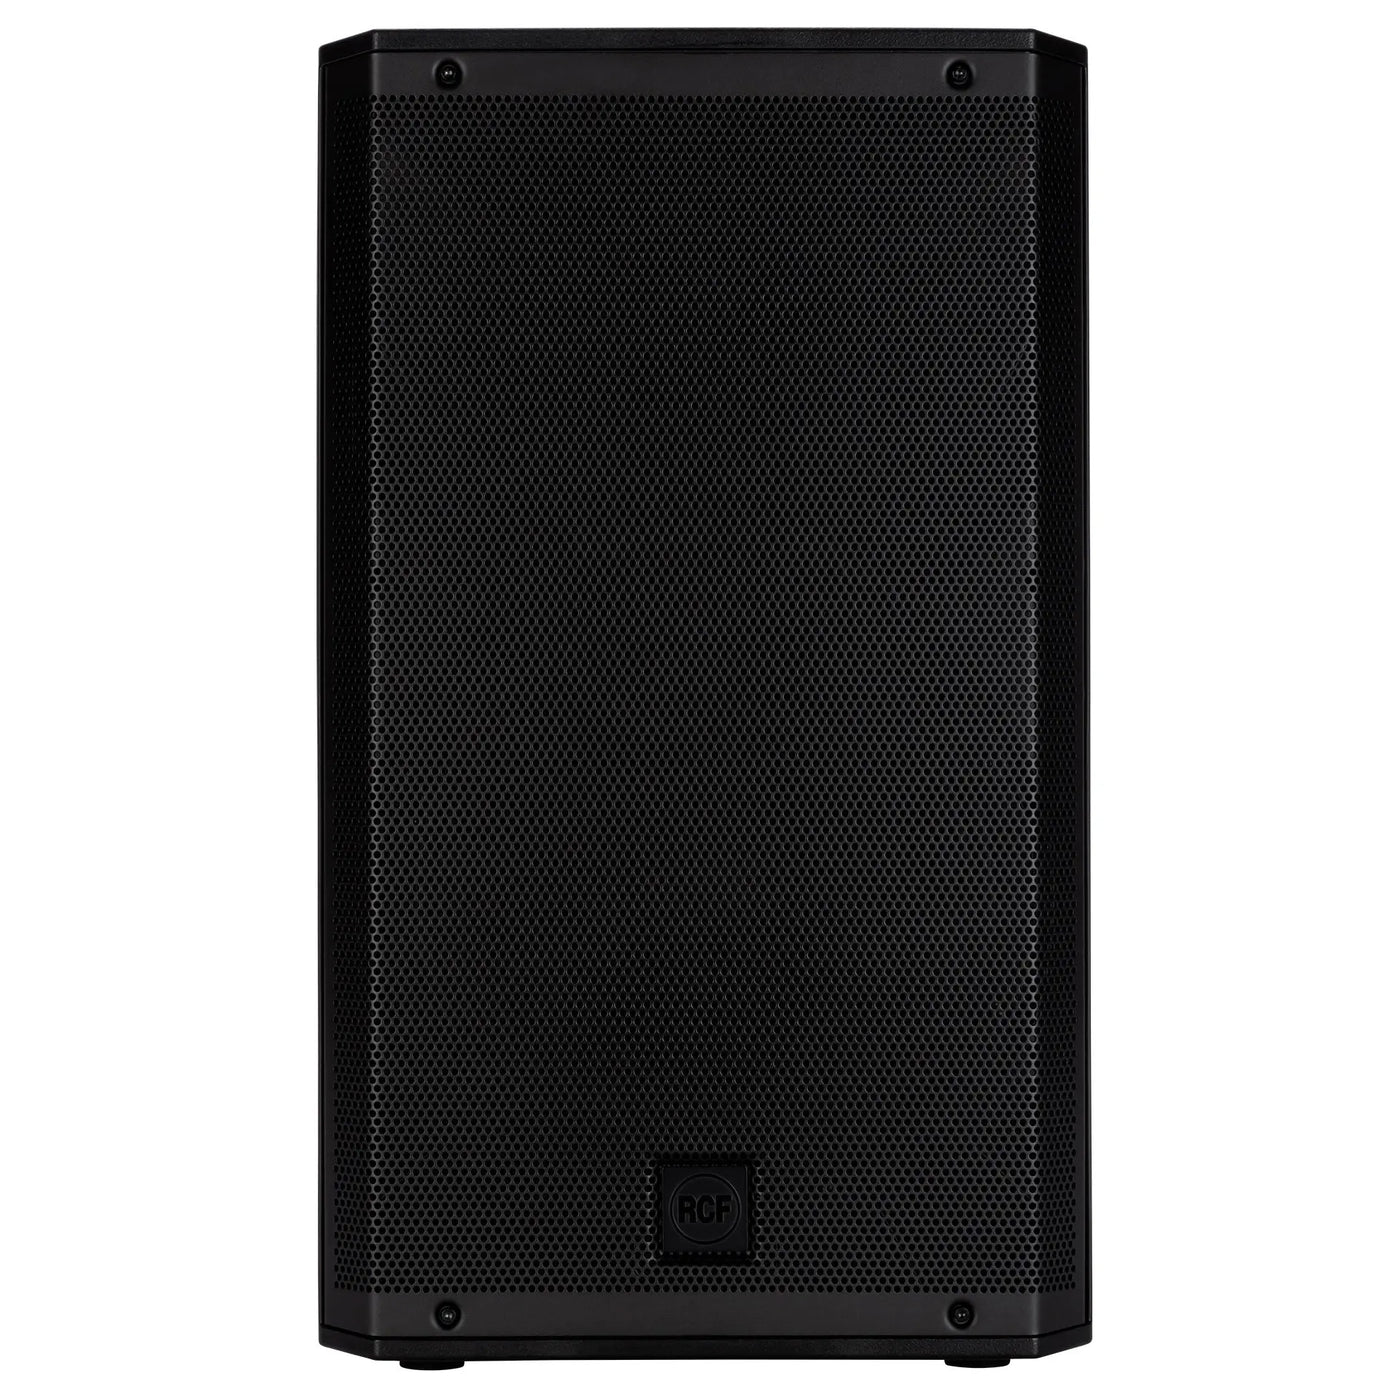 RCF ART 912-A Professional 2100W Active 12" Speakers RCF